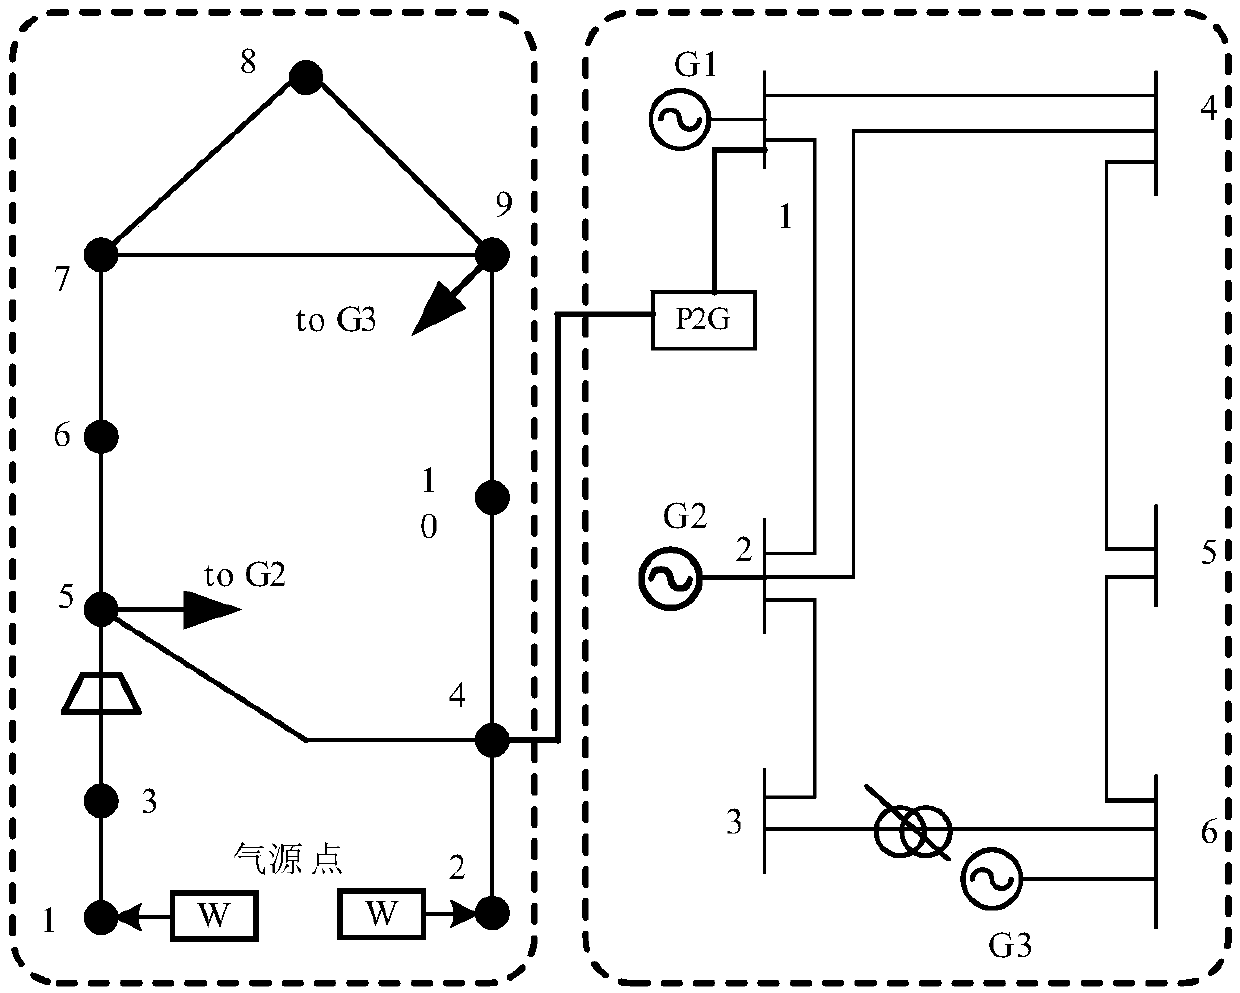 Electricity-gas interconnection system unit combination linear model and system considering electricity-to-gas coupling